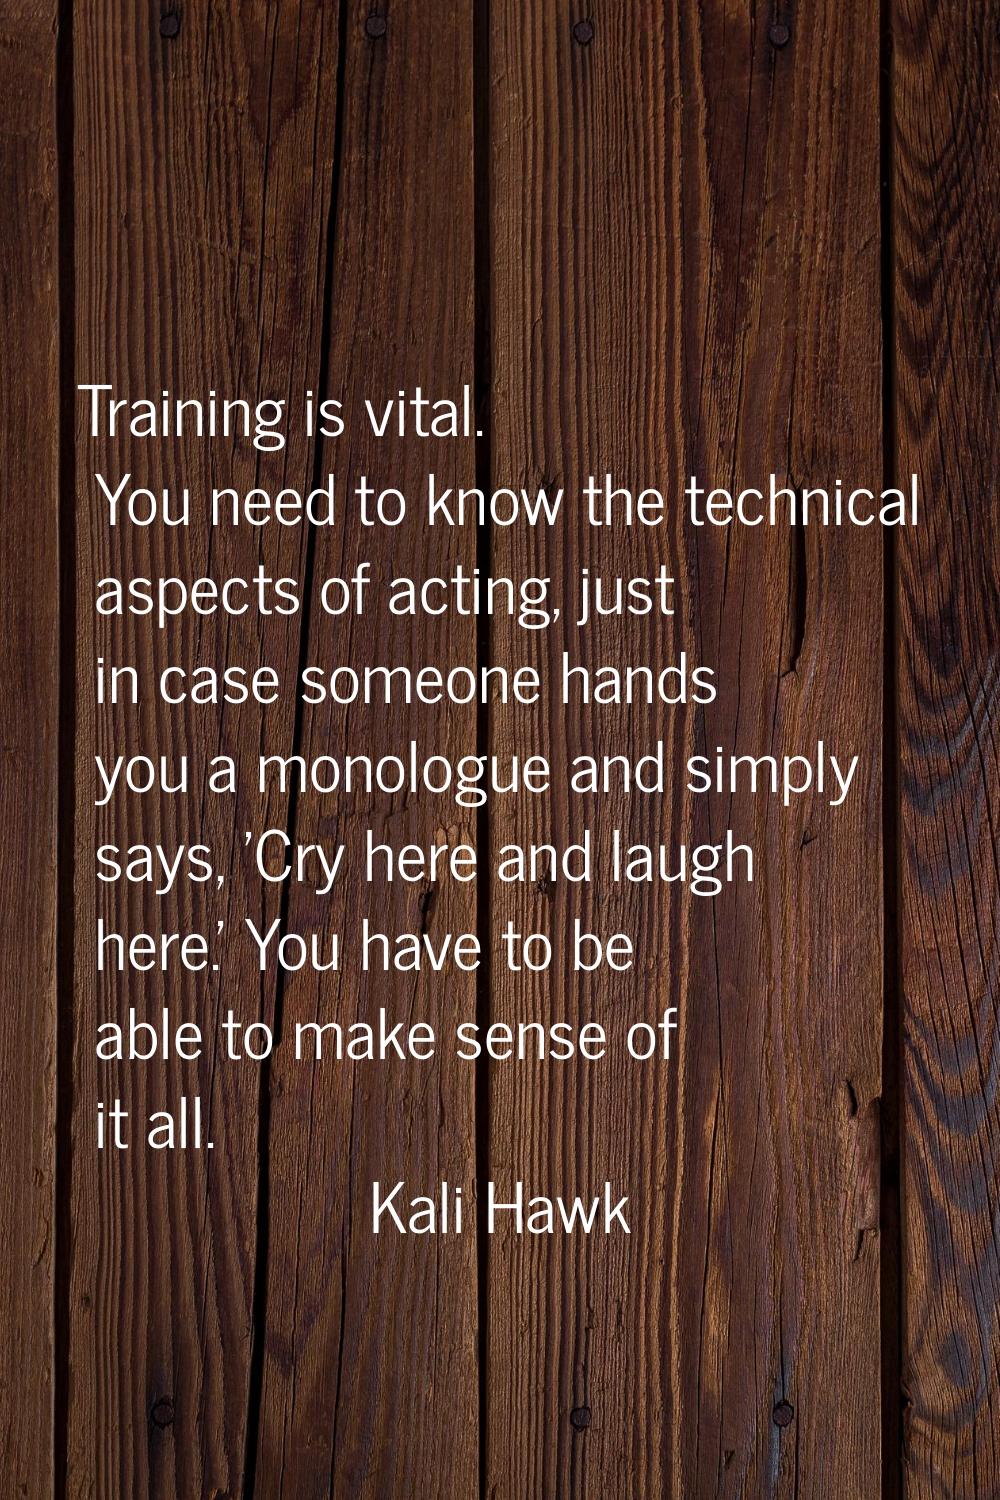 Training is vital. You need to know the technical aspects of acting, just in case someone hands you